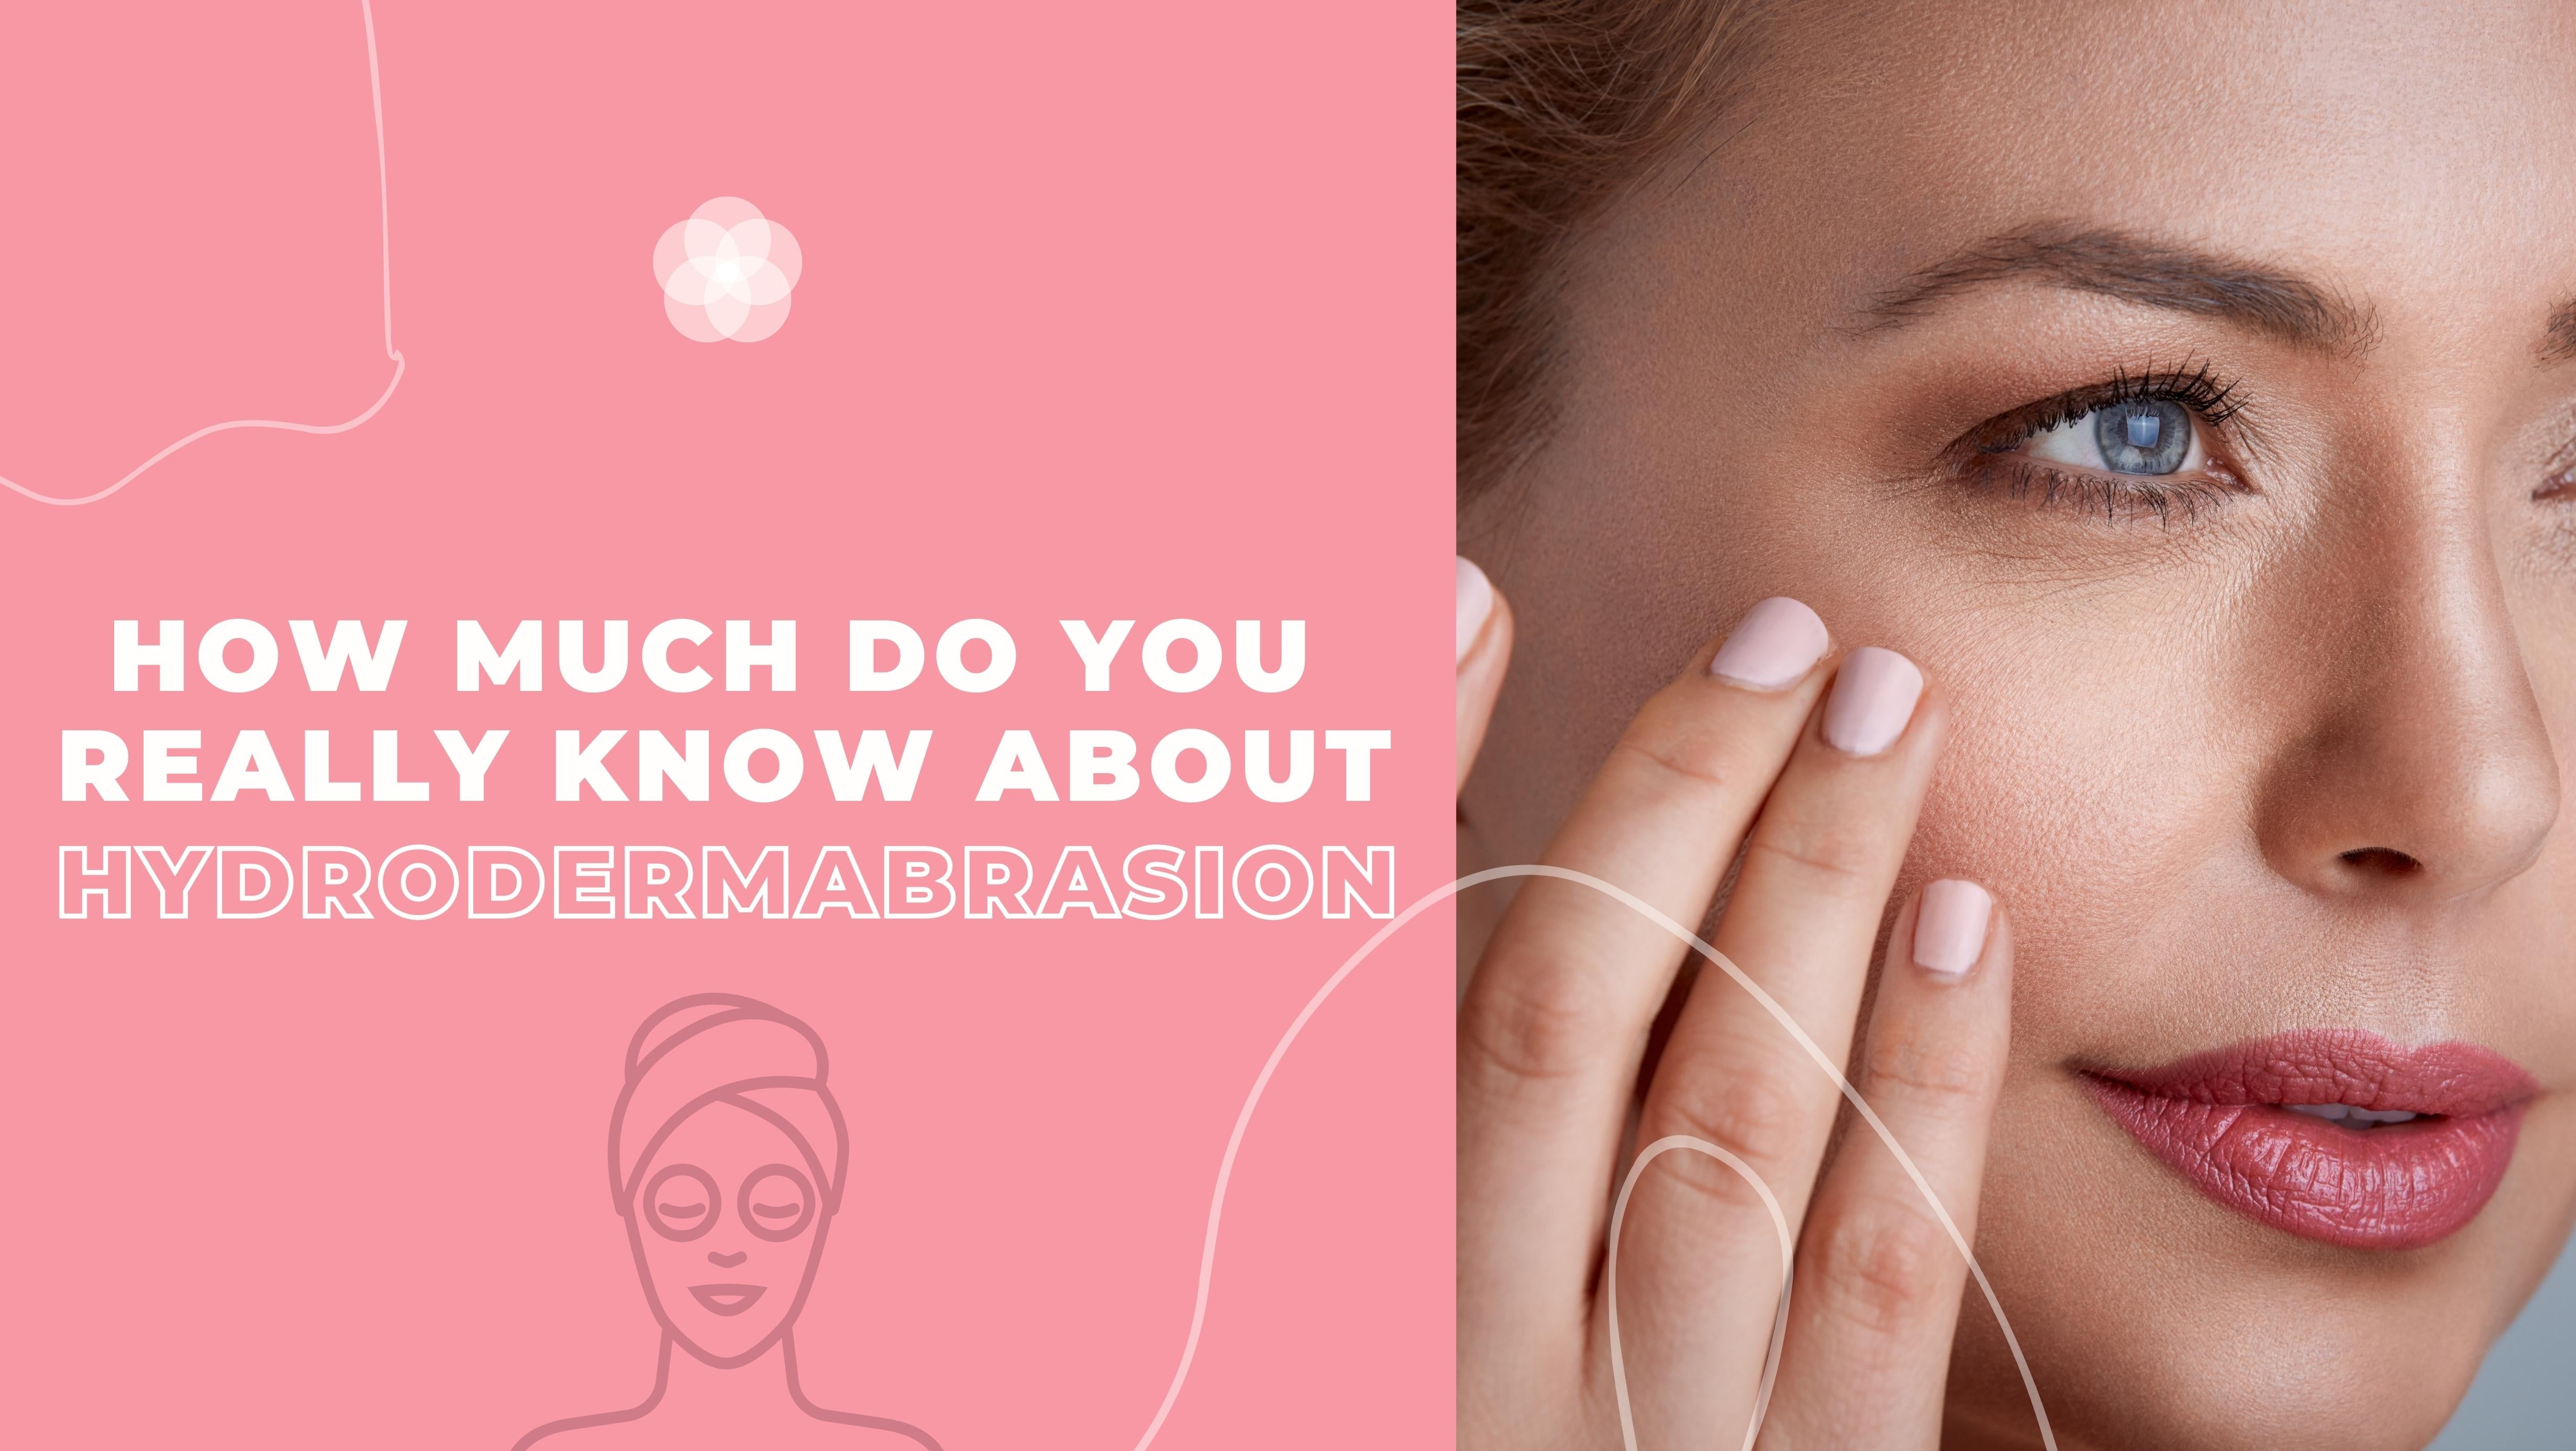 How Much Do You Really Know About Hydrodermabrasion?